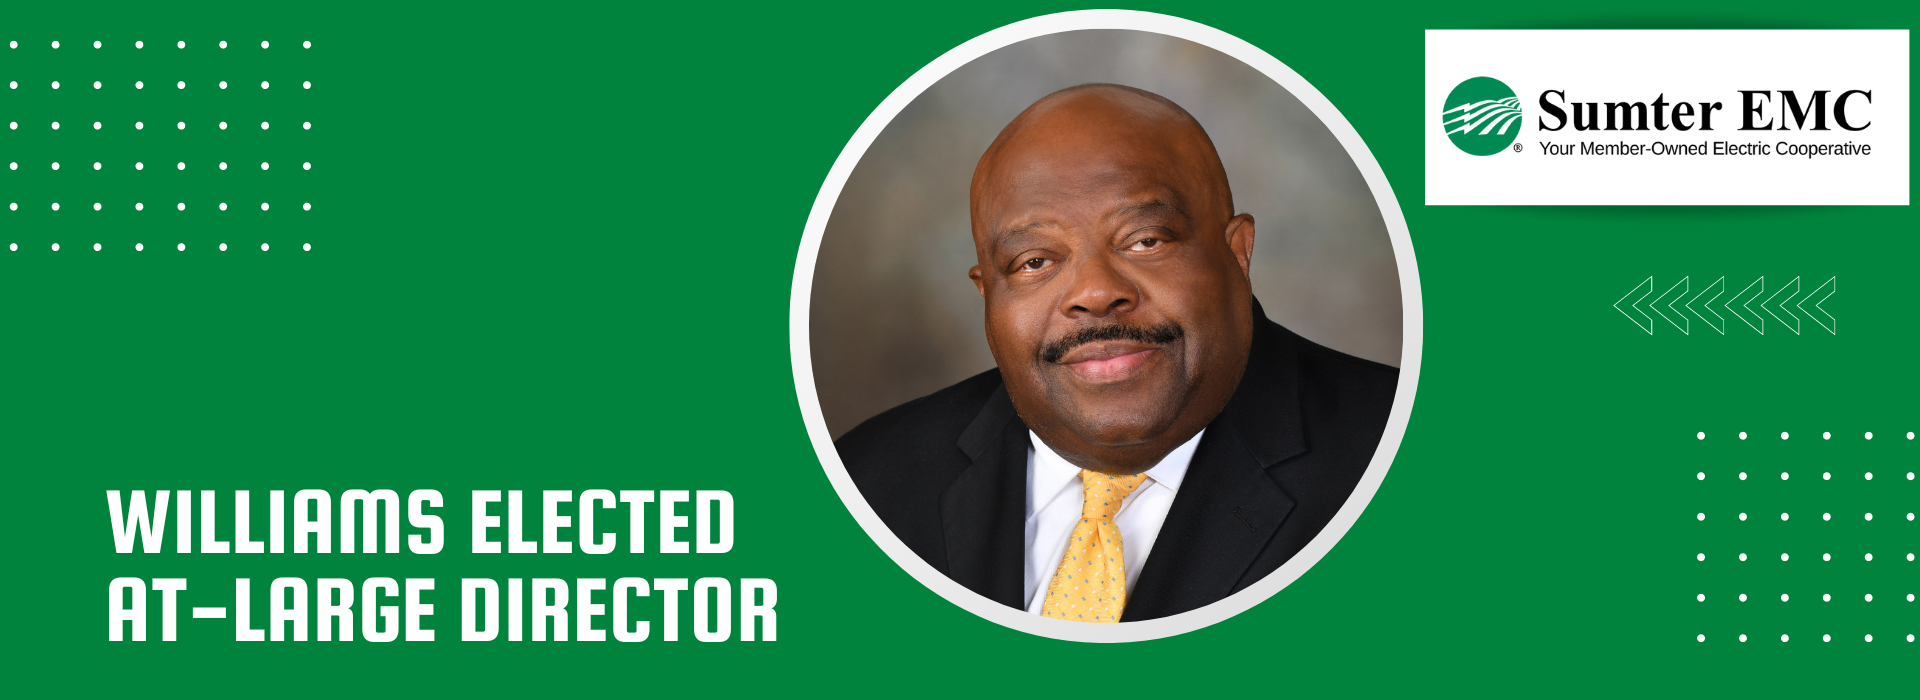 Sumter EMC Board Appoints Leon Williams as At-Large Director 